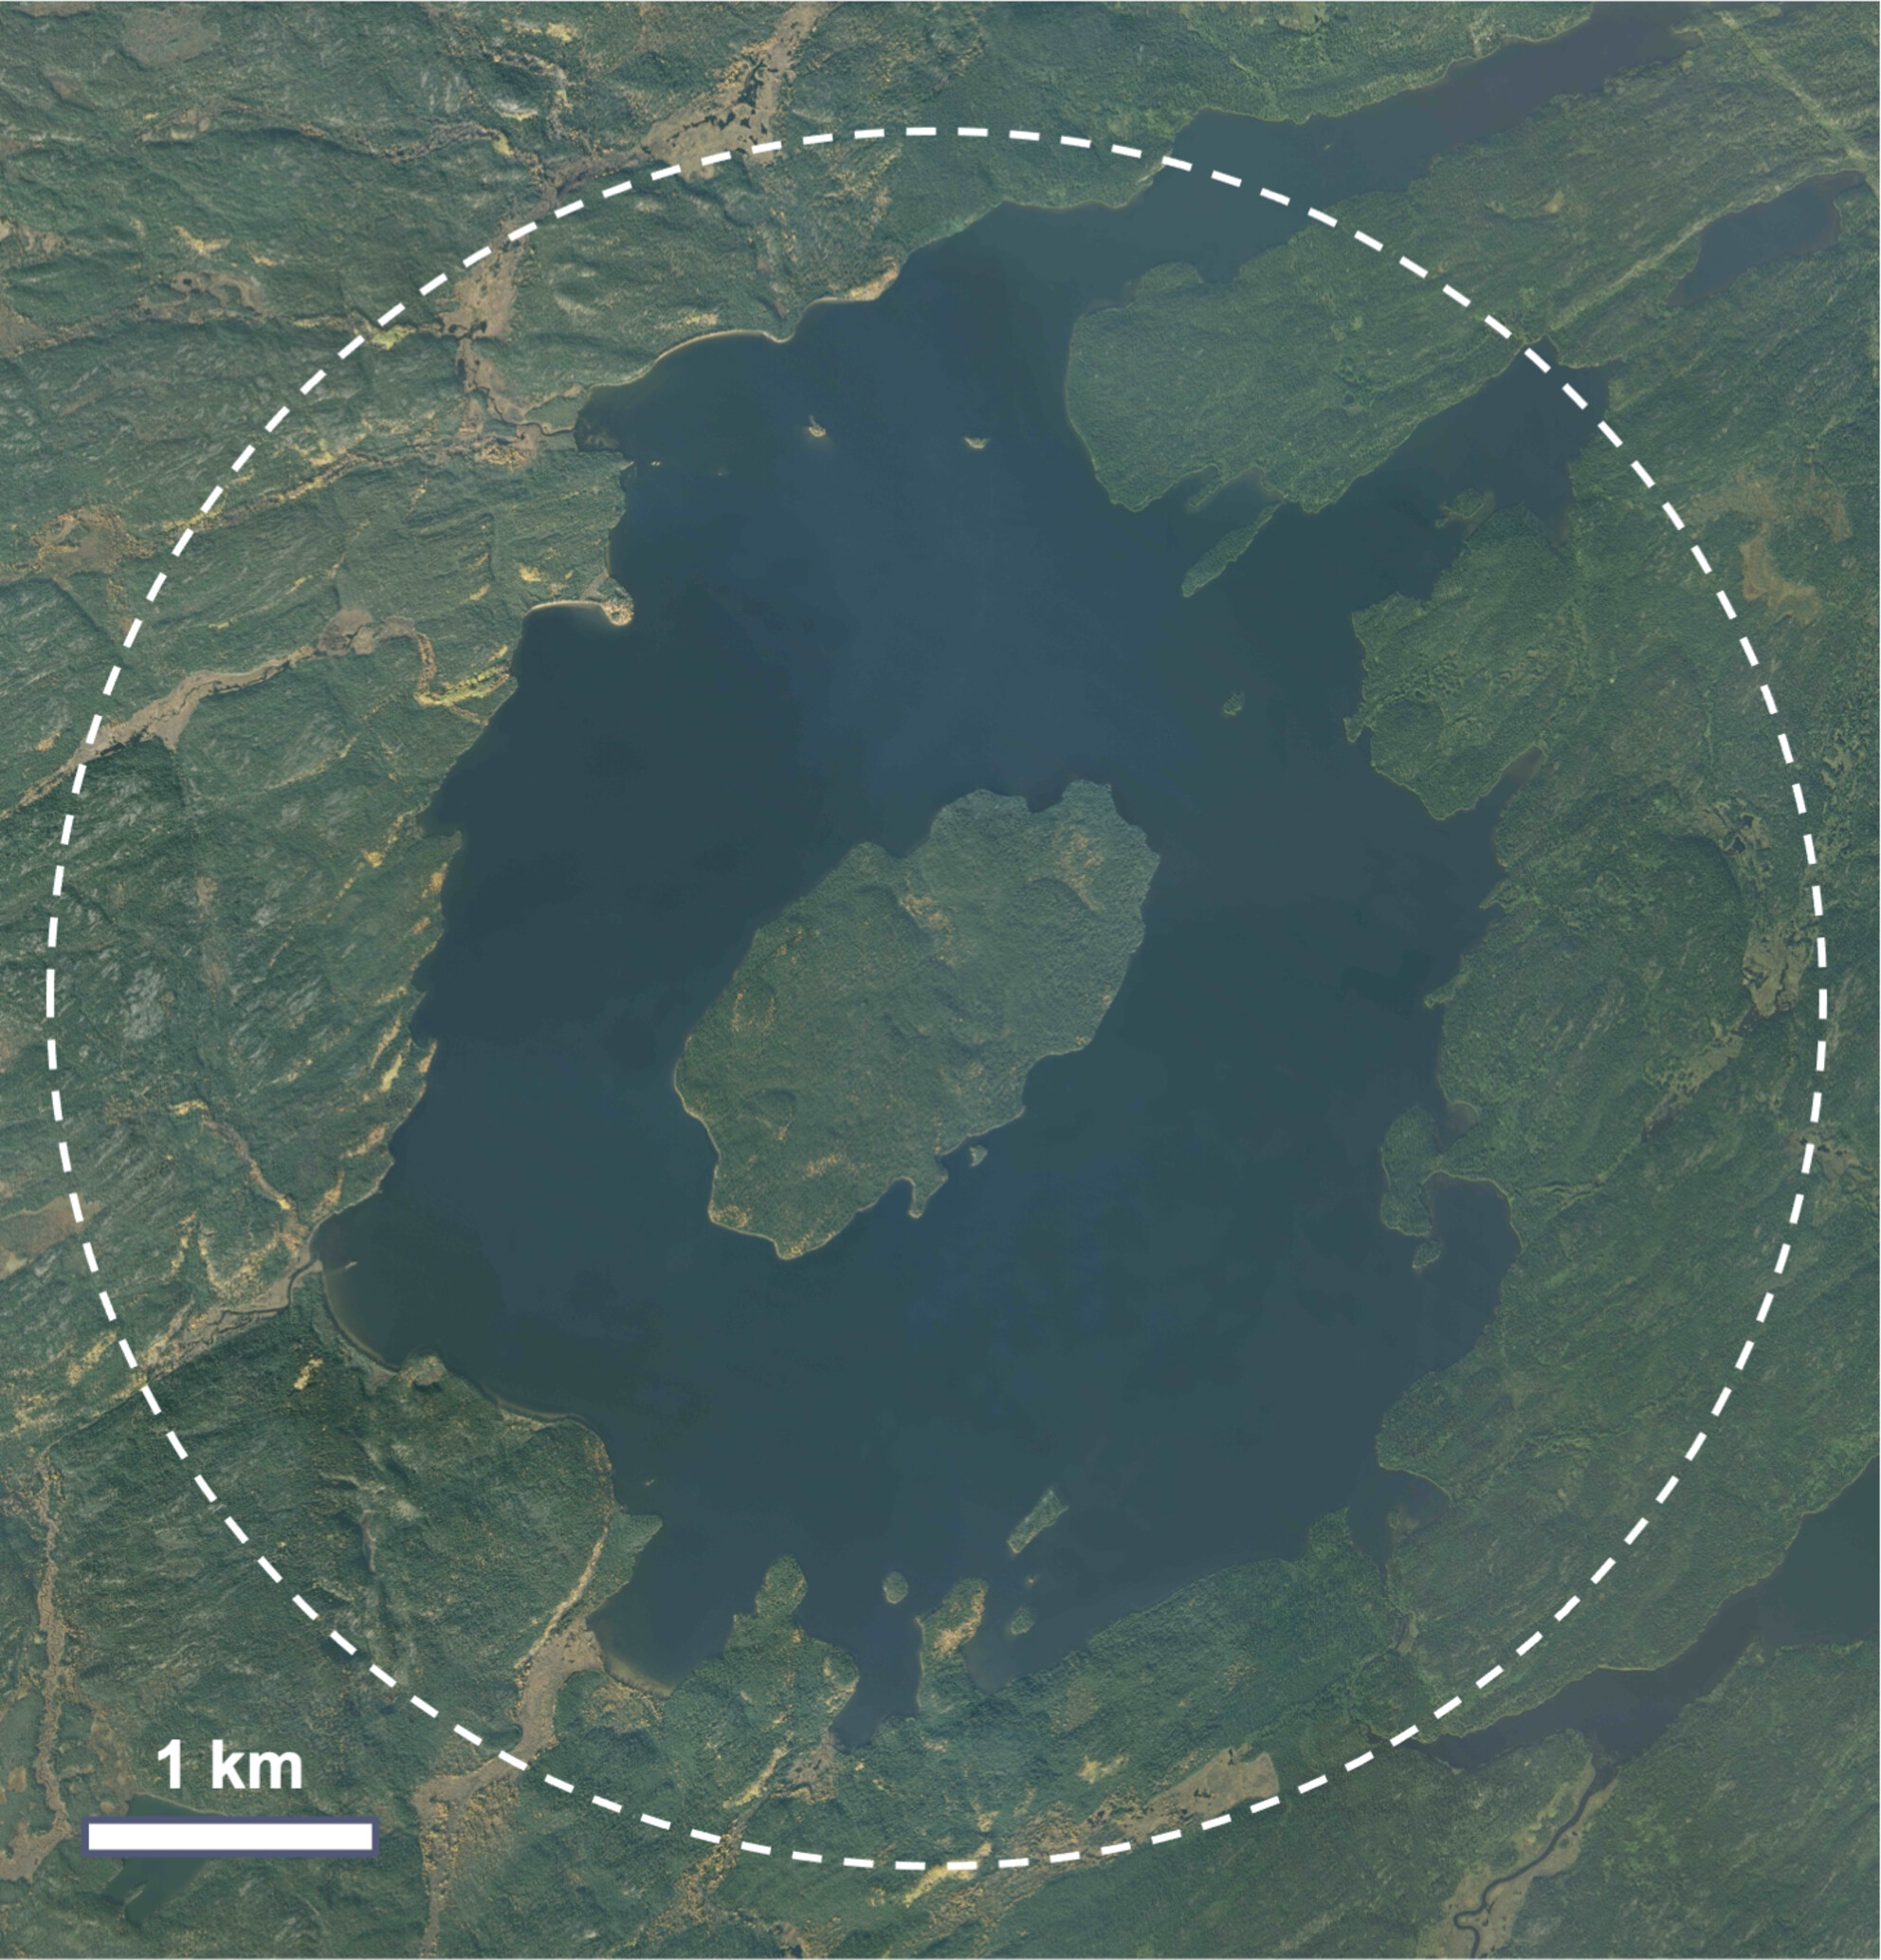 a lake visible from space. a dotted white line surrounds the lake, indicating where a crater is located